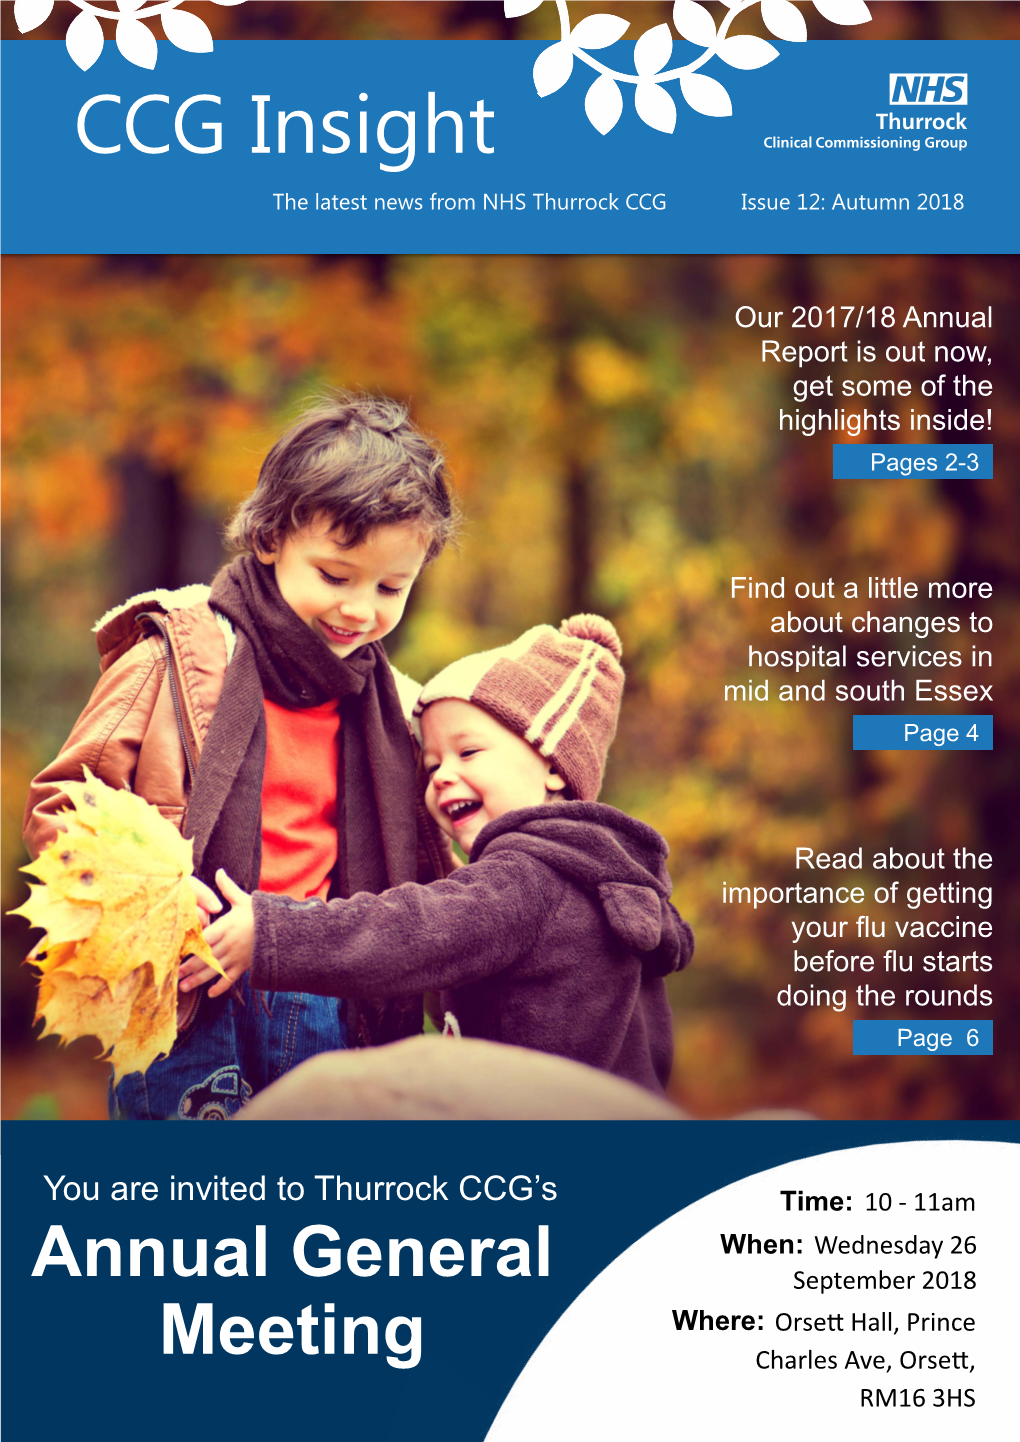 CCG Insight the Latest News from NHS Thurrock CCG Issue 12: Autumn 2018